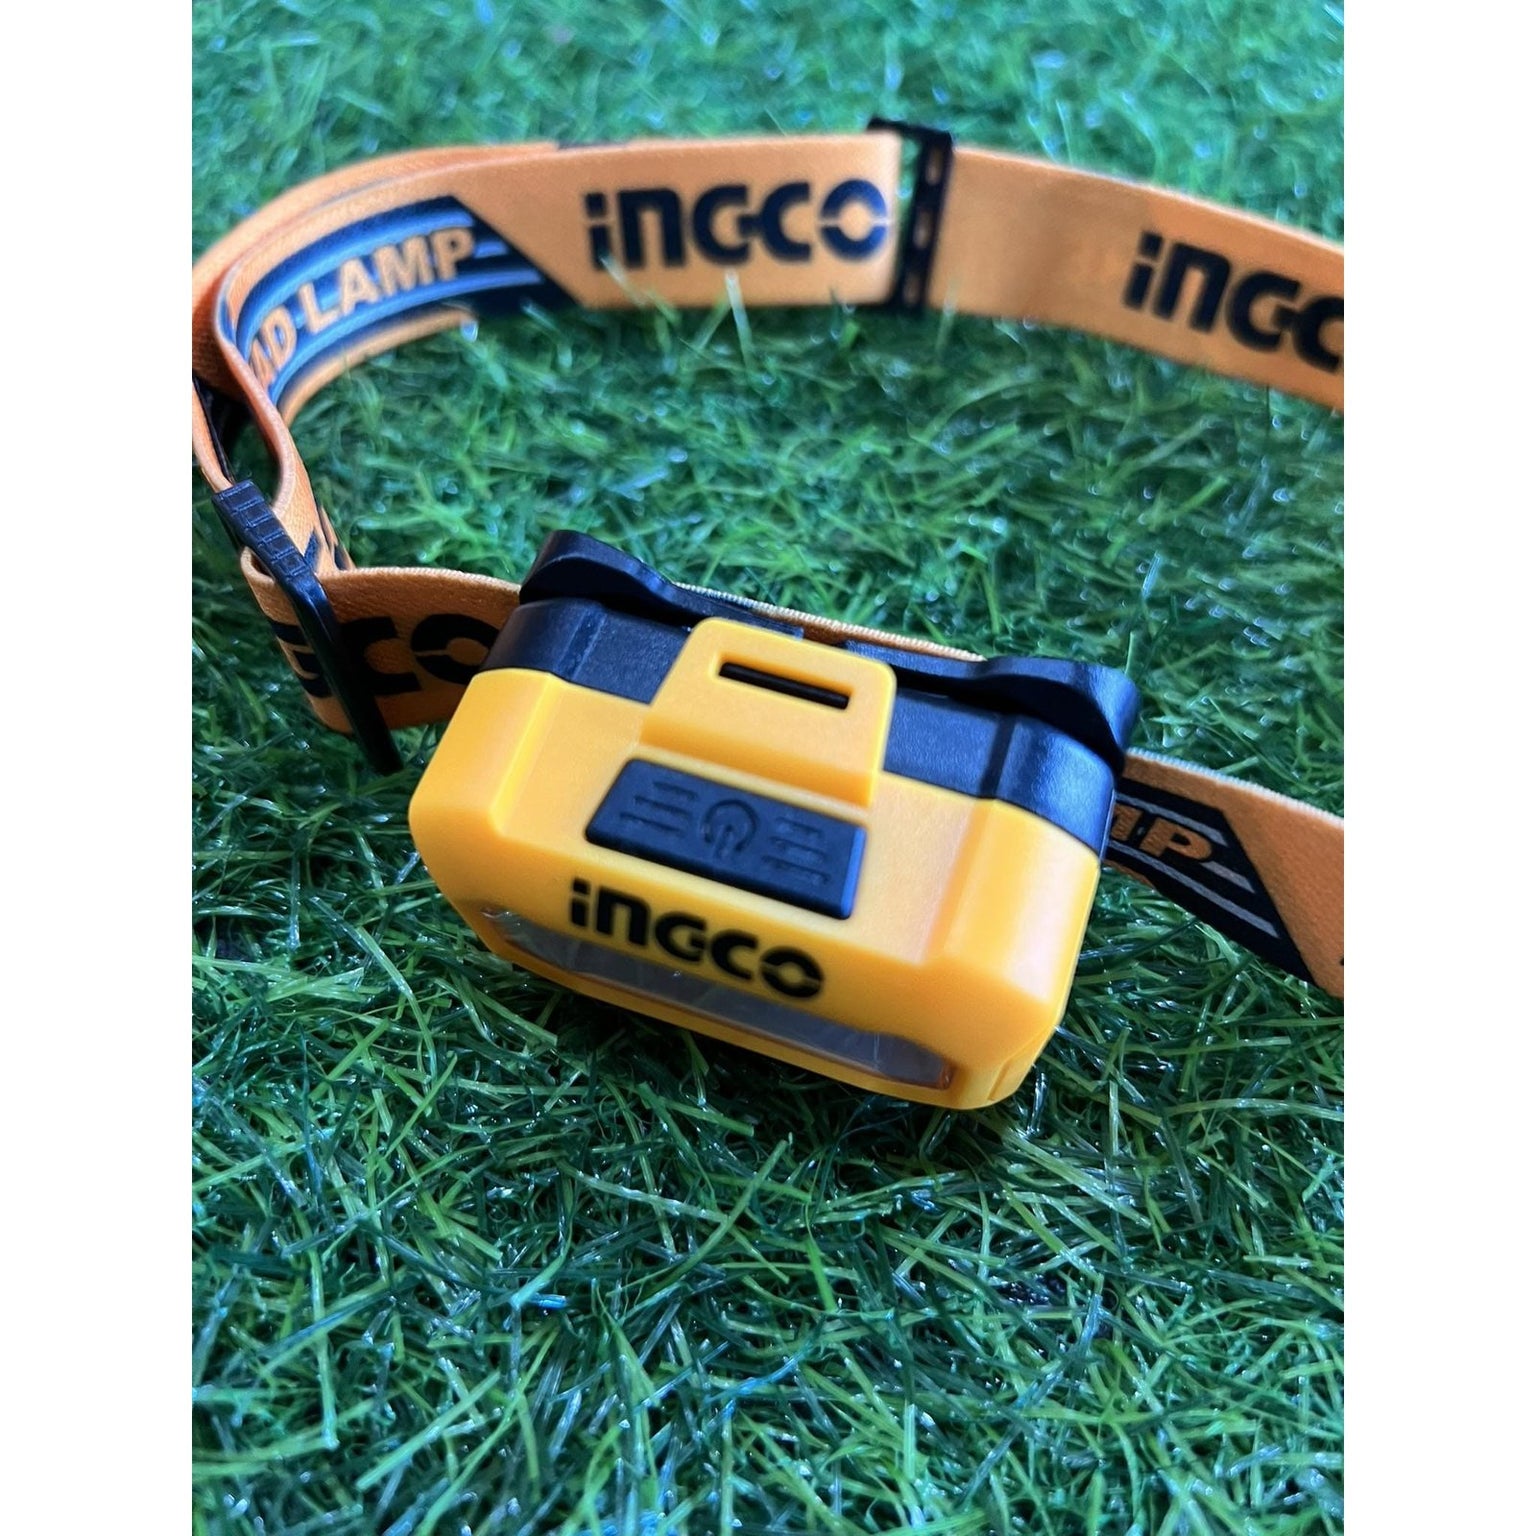 Ingco Headlamp - HHL013AAA5 - Buy Online in Accra, Ghana at Supply Master Specialty Safety Equipment Buy Tools hardware Building materials